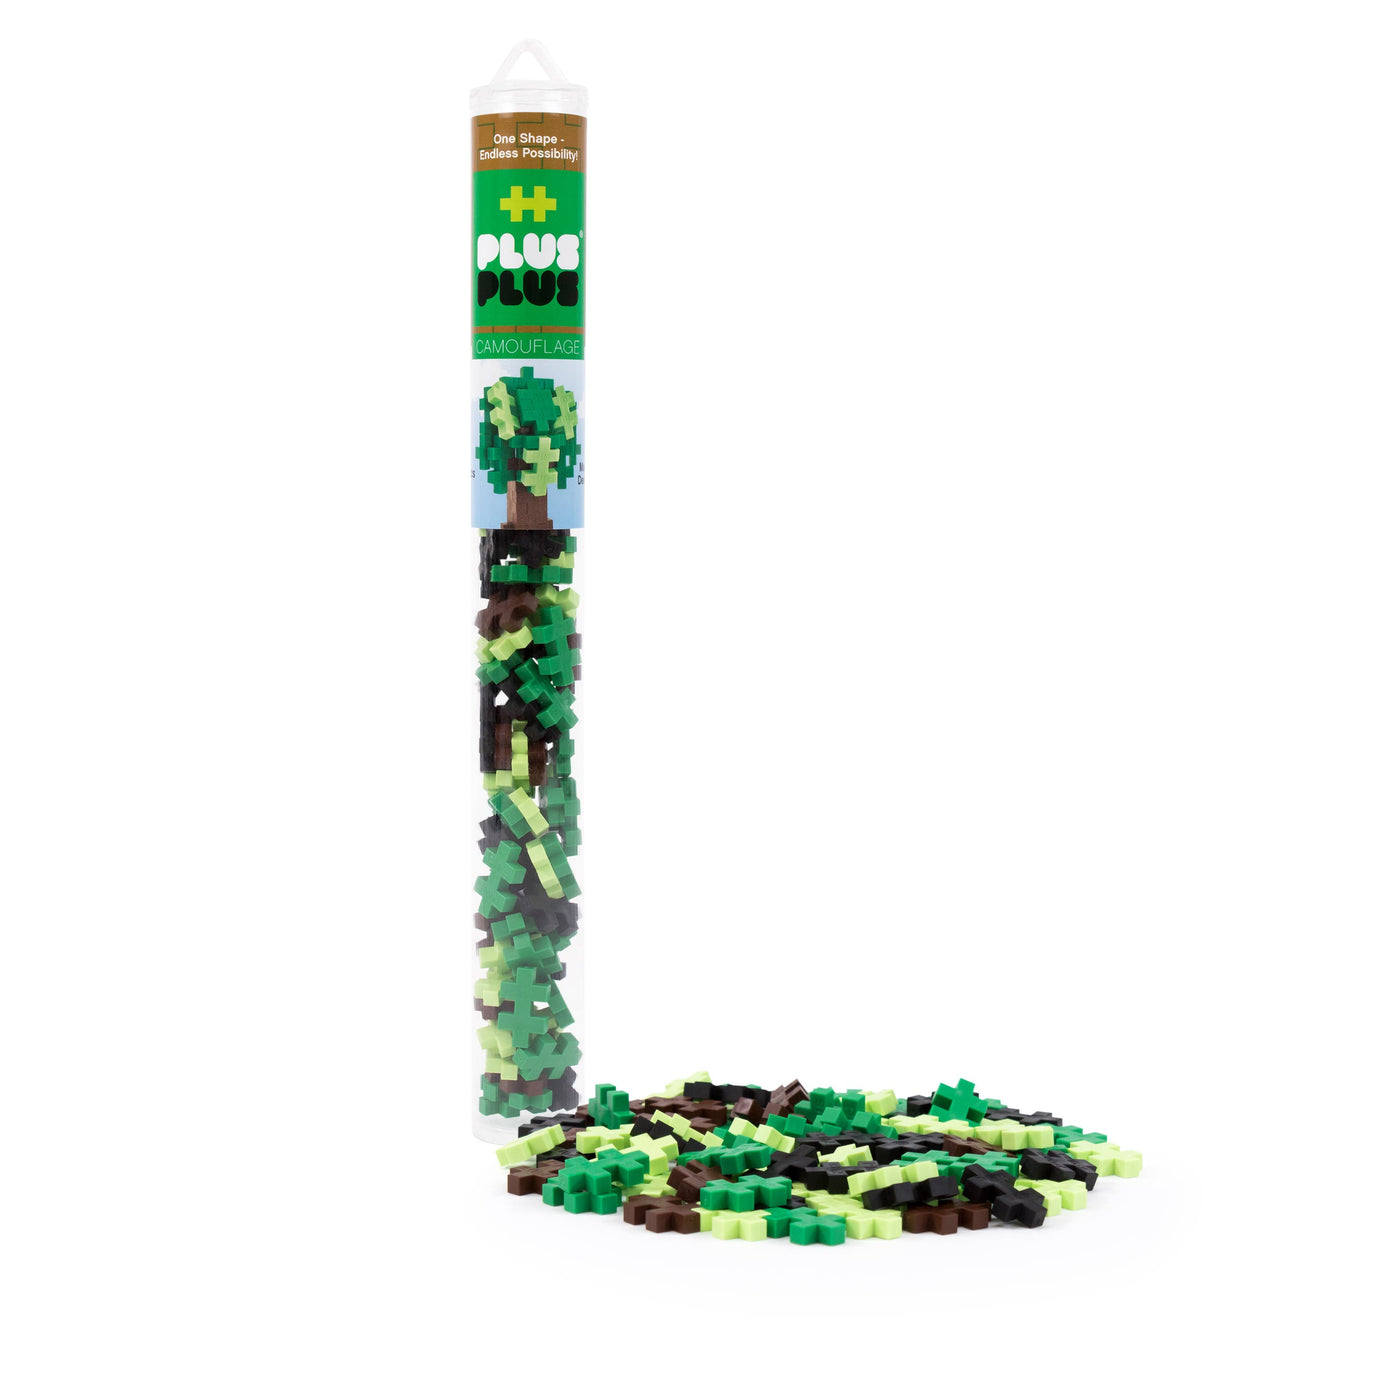 Camouflage Mix Building Pieces Tube